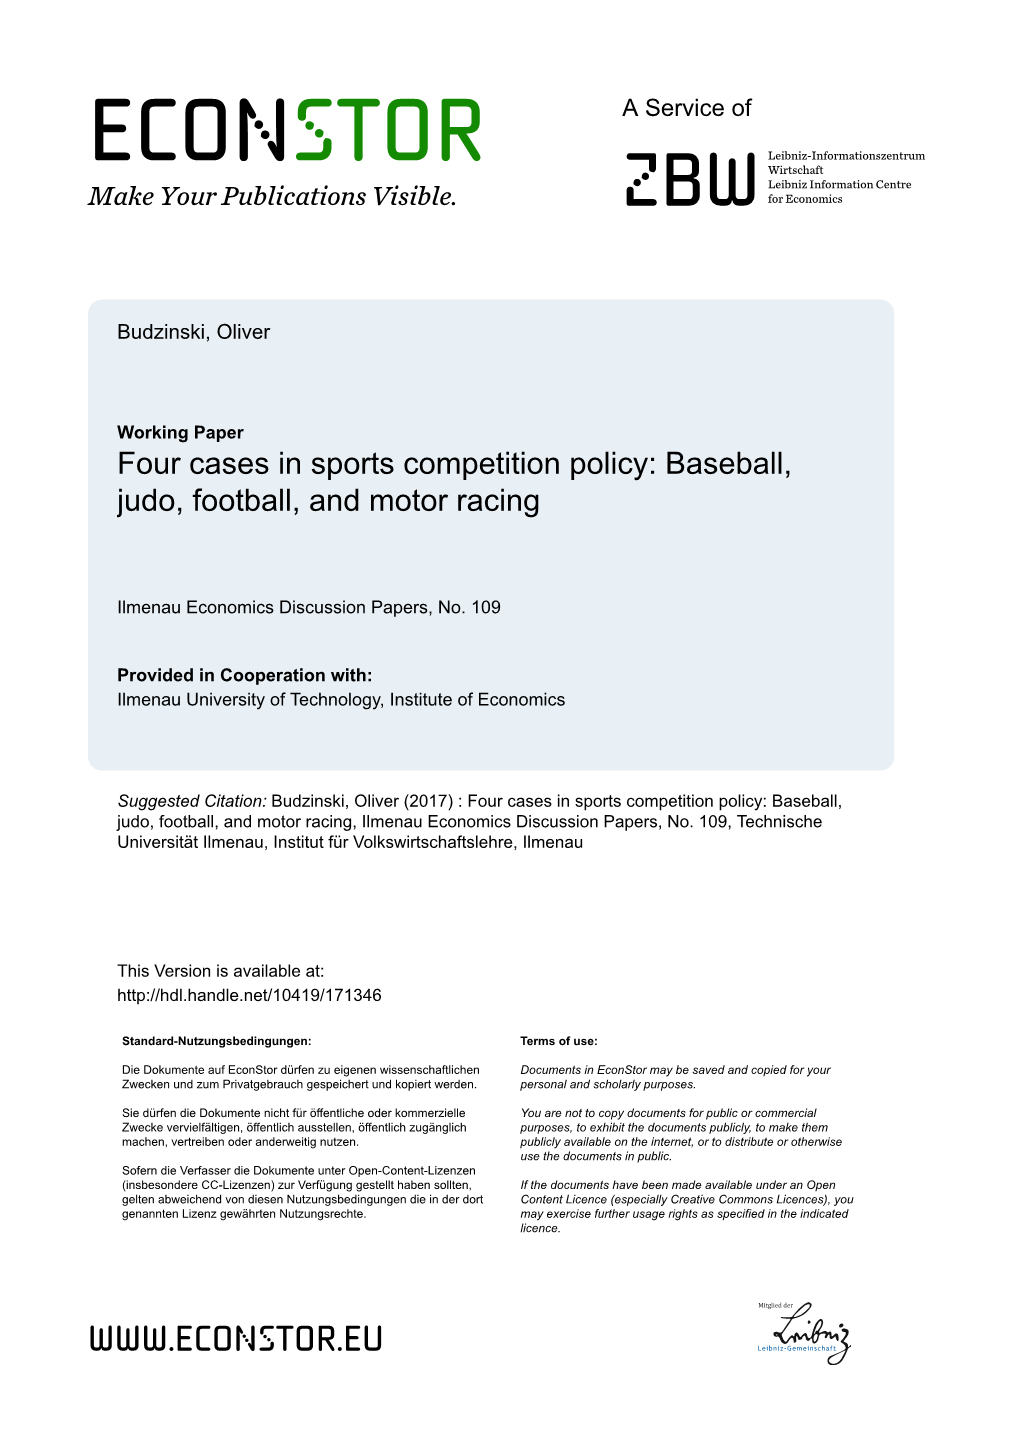 Four Cases in Sports Competition Policy: Baseball, Judo, Football, and Motor Racing